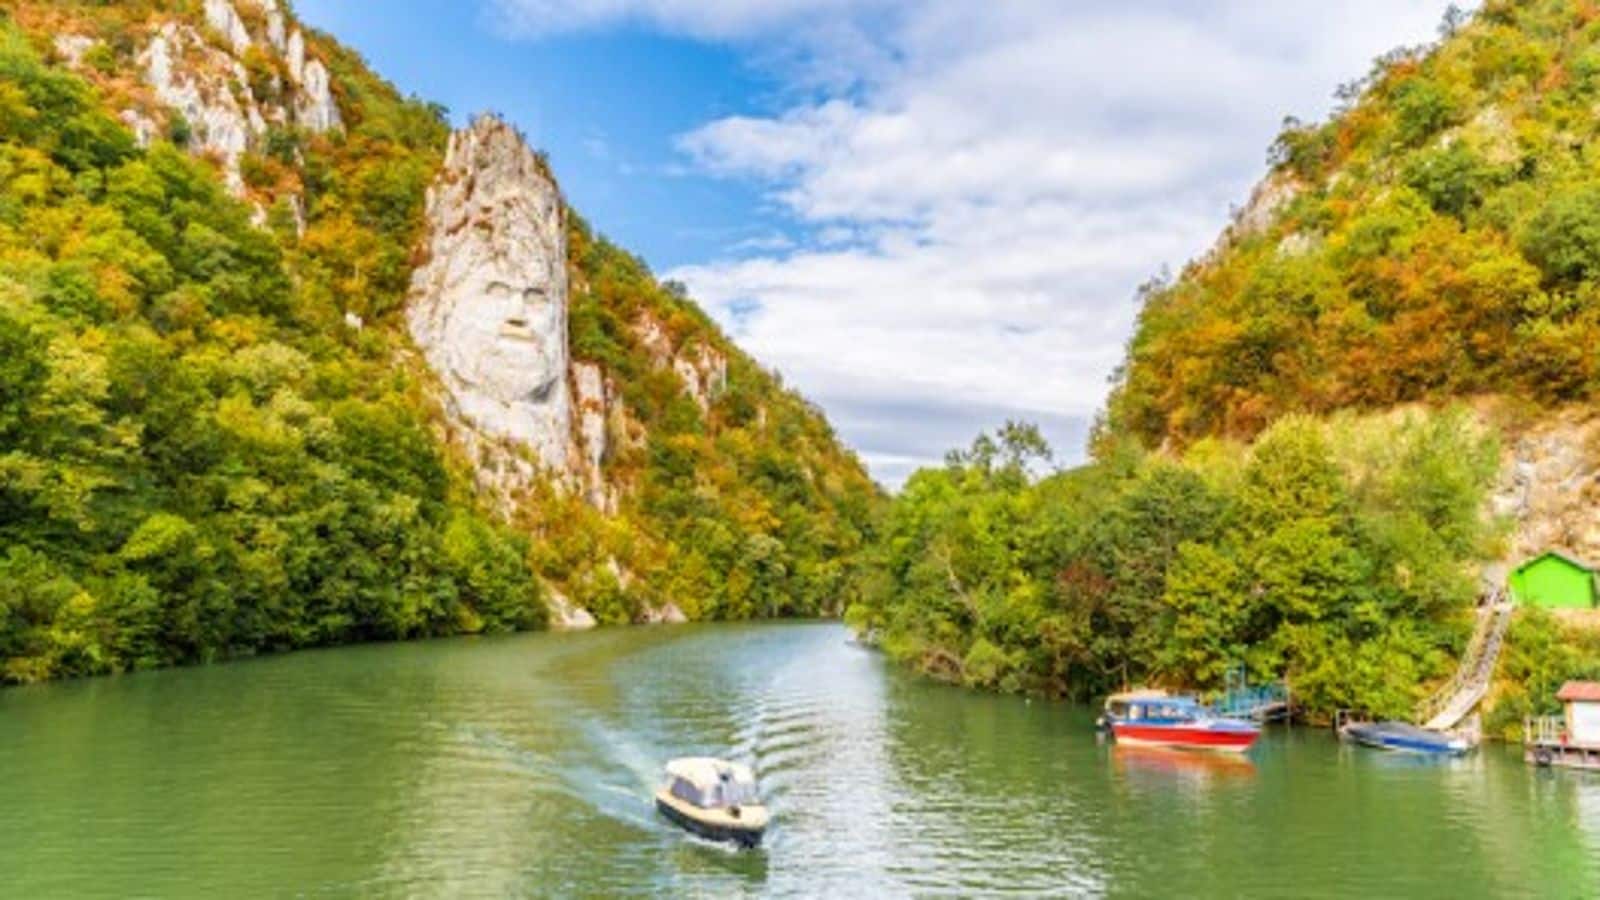 Go for a river cruise experience on the Danube River